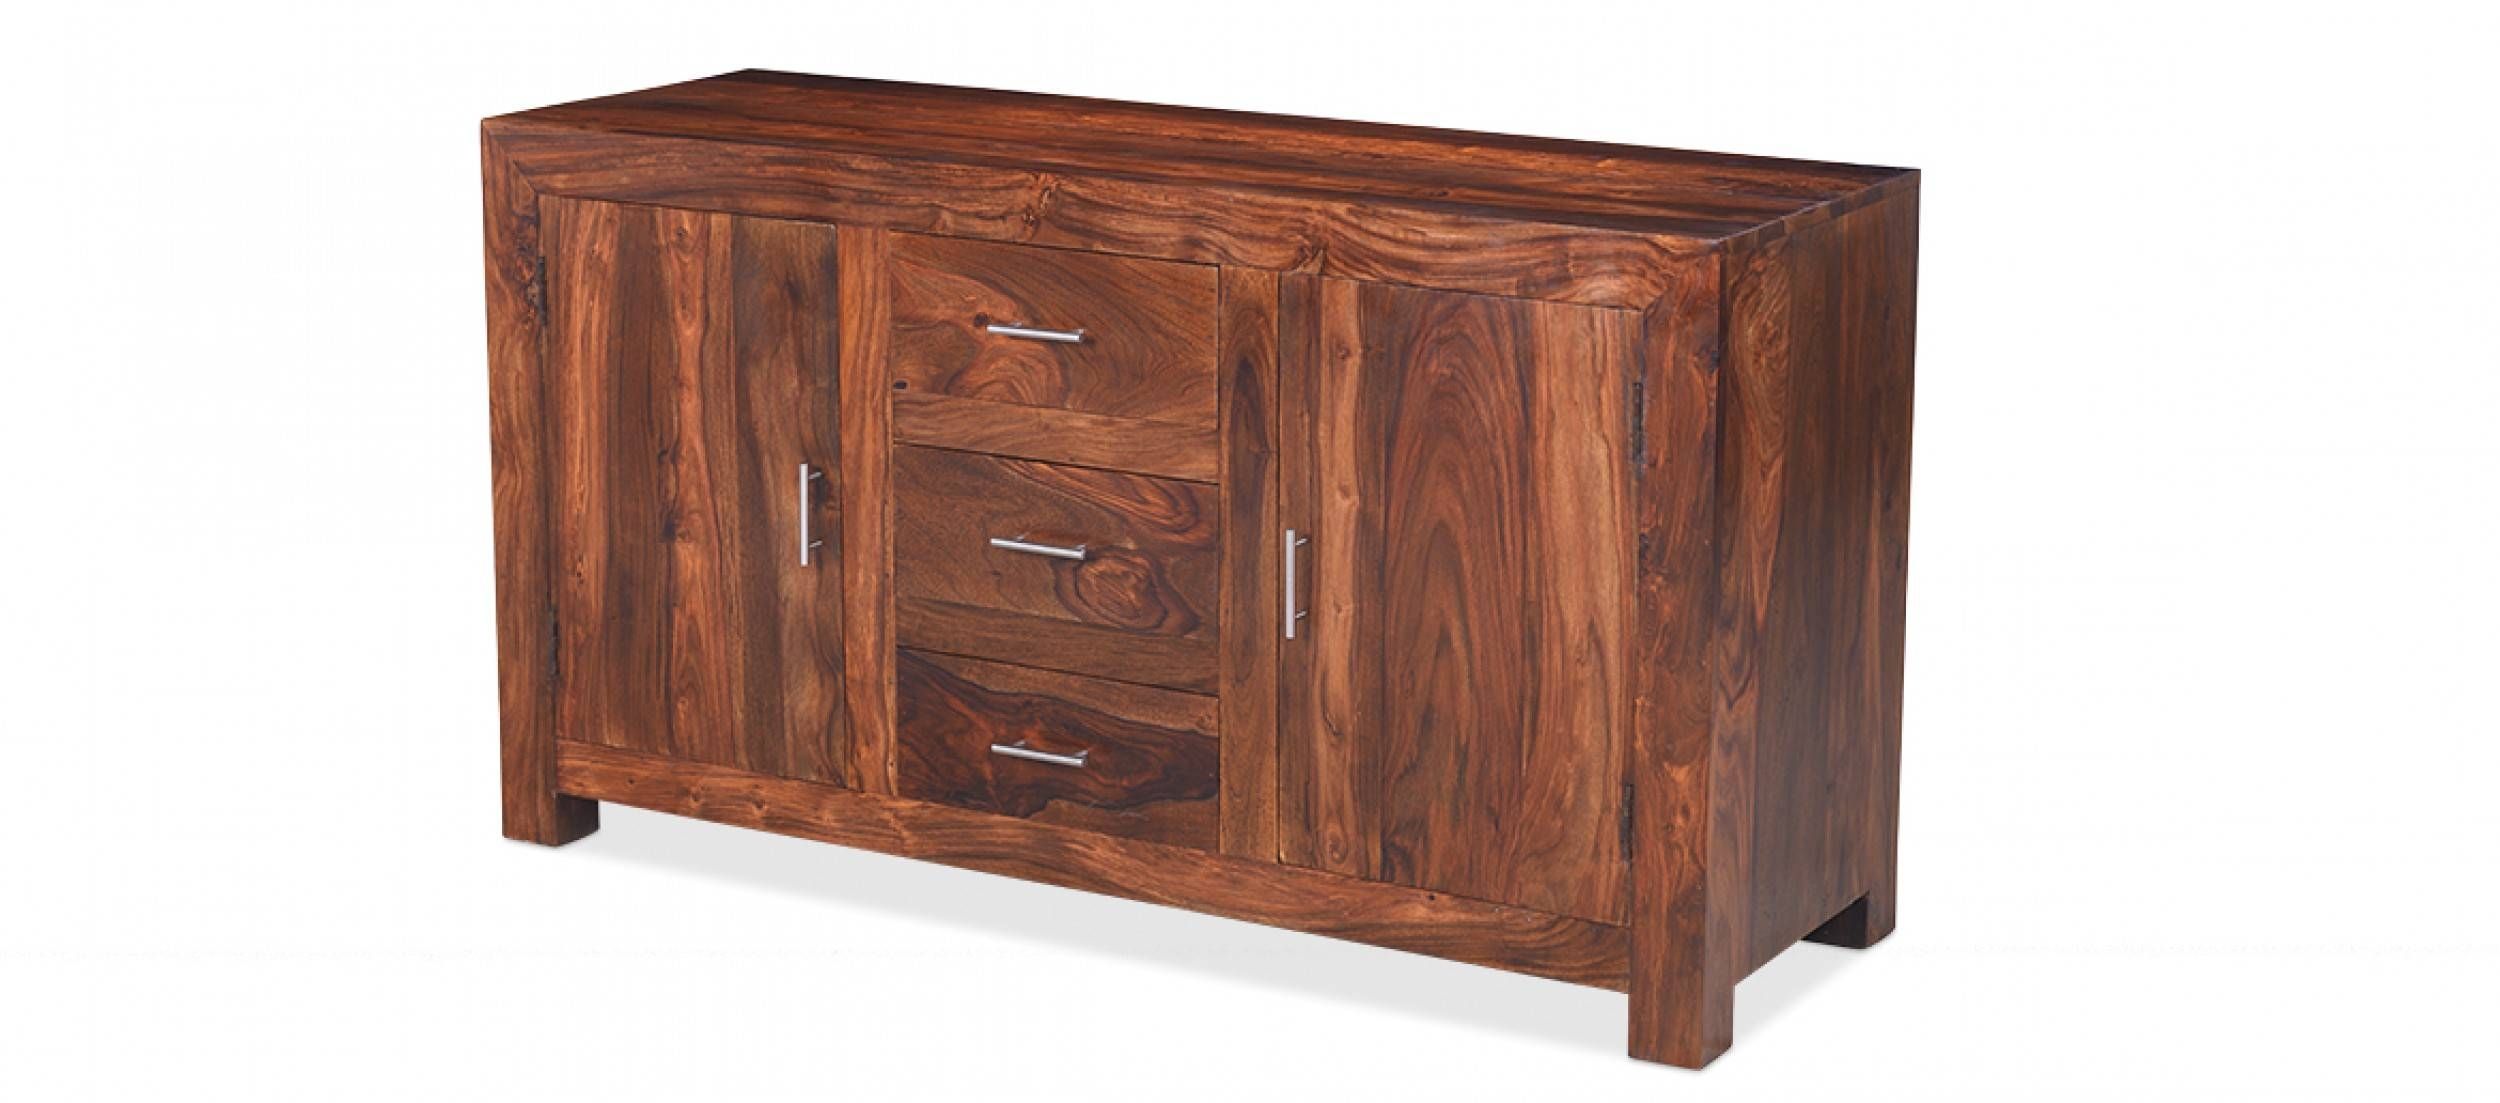 Cube Sheesham Large Sideboard | Quercus Living For Sheesham Sideboards (View 16 of 20)